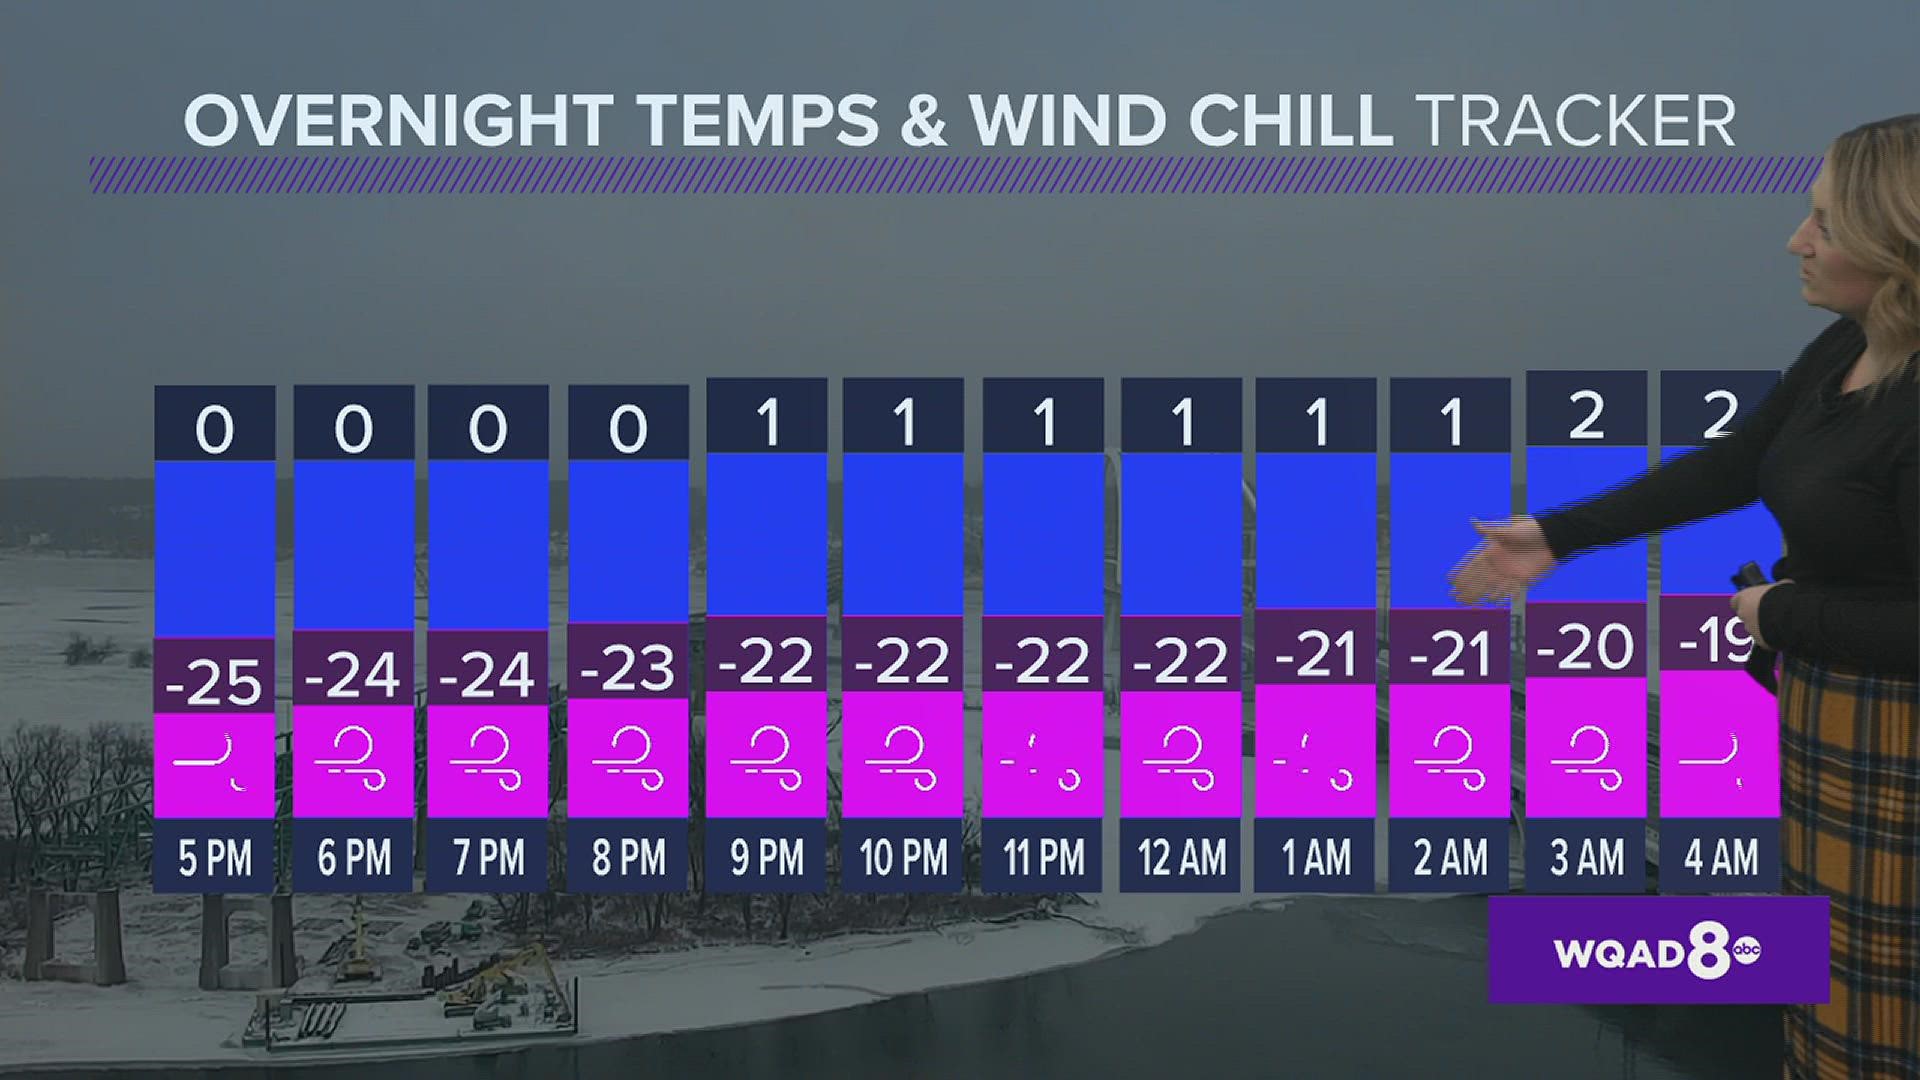 An extremely frigid night with gusty winds ahead